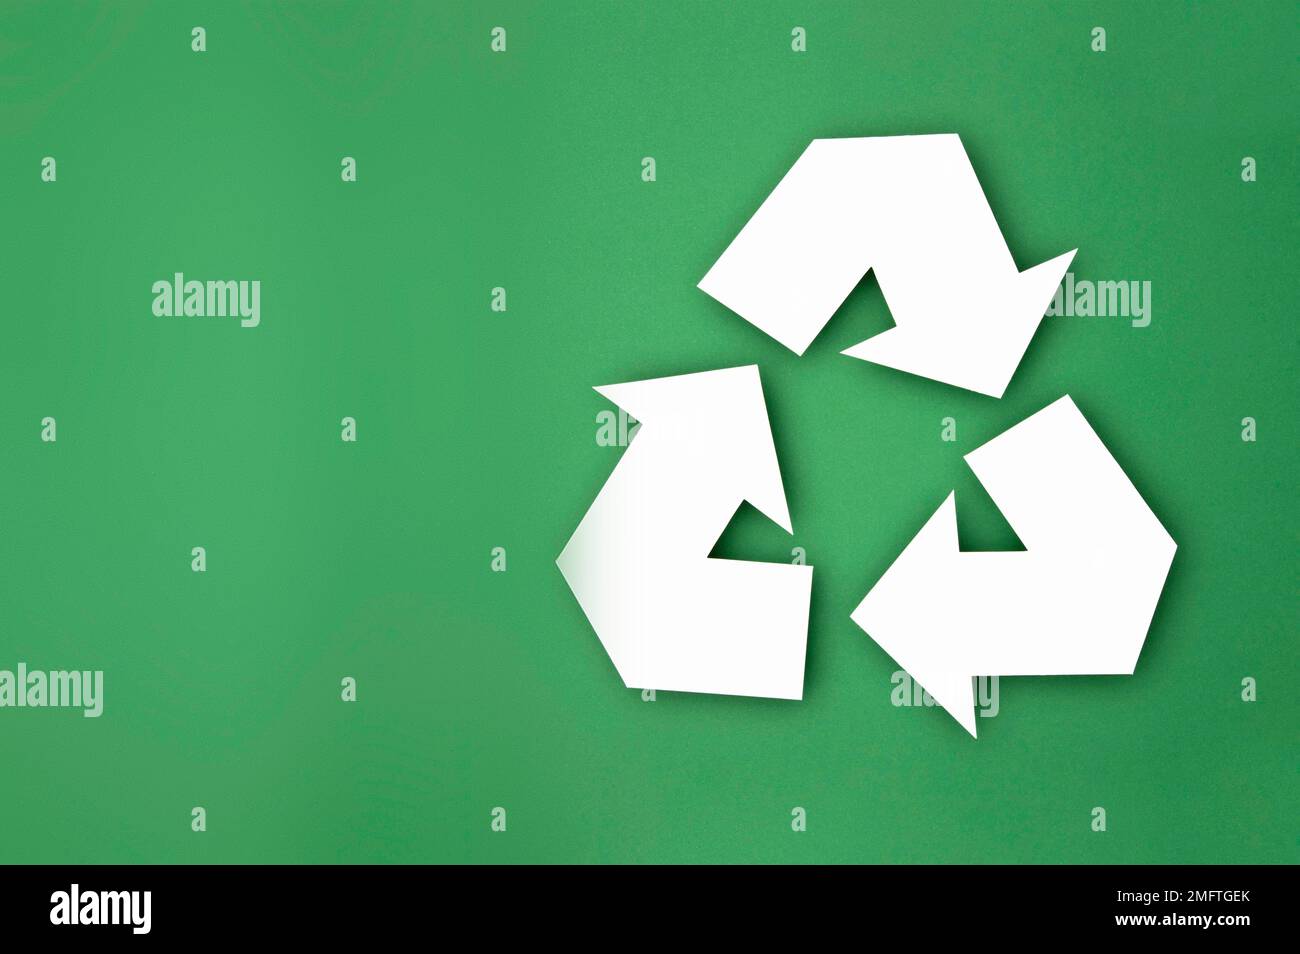 eco friendly recycling concept Stock Photo